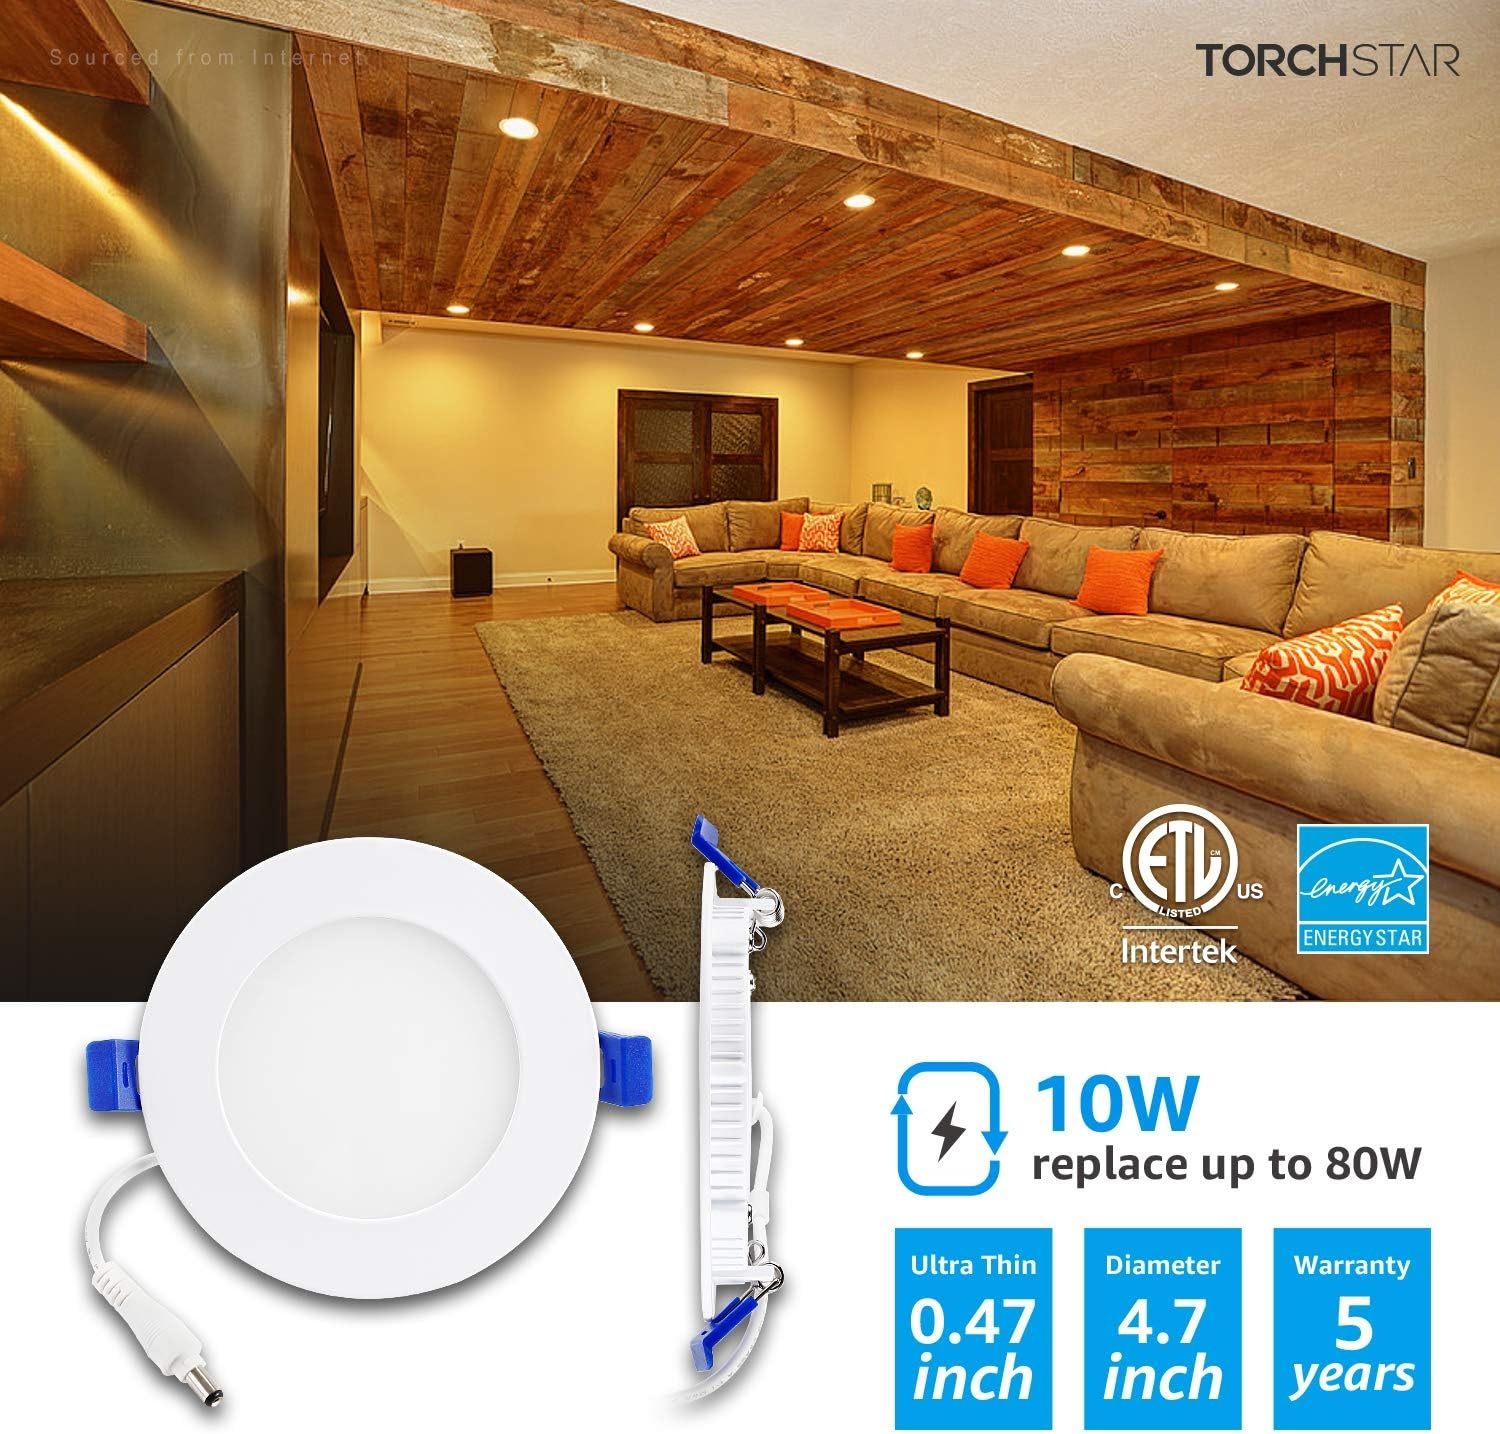 TORCHSTAR Basic Series 12-Pack 10W 4 Inch LED Recessed Lighting with Junction Box, 2700K Soft White, 5%-100% Dimmable, ETL and Energy Star Certified